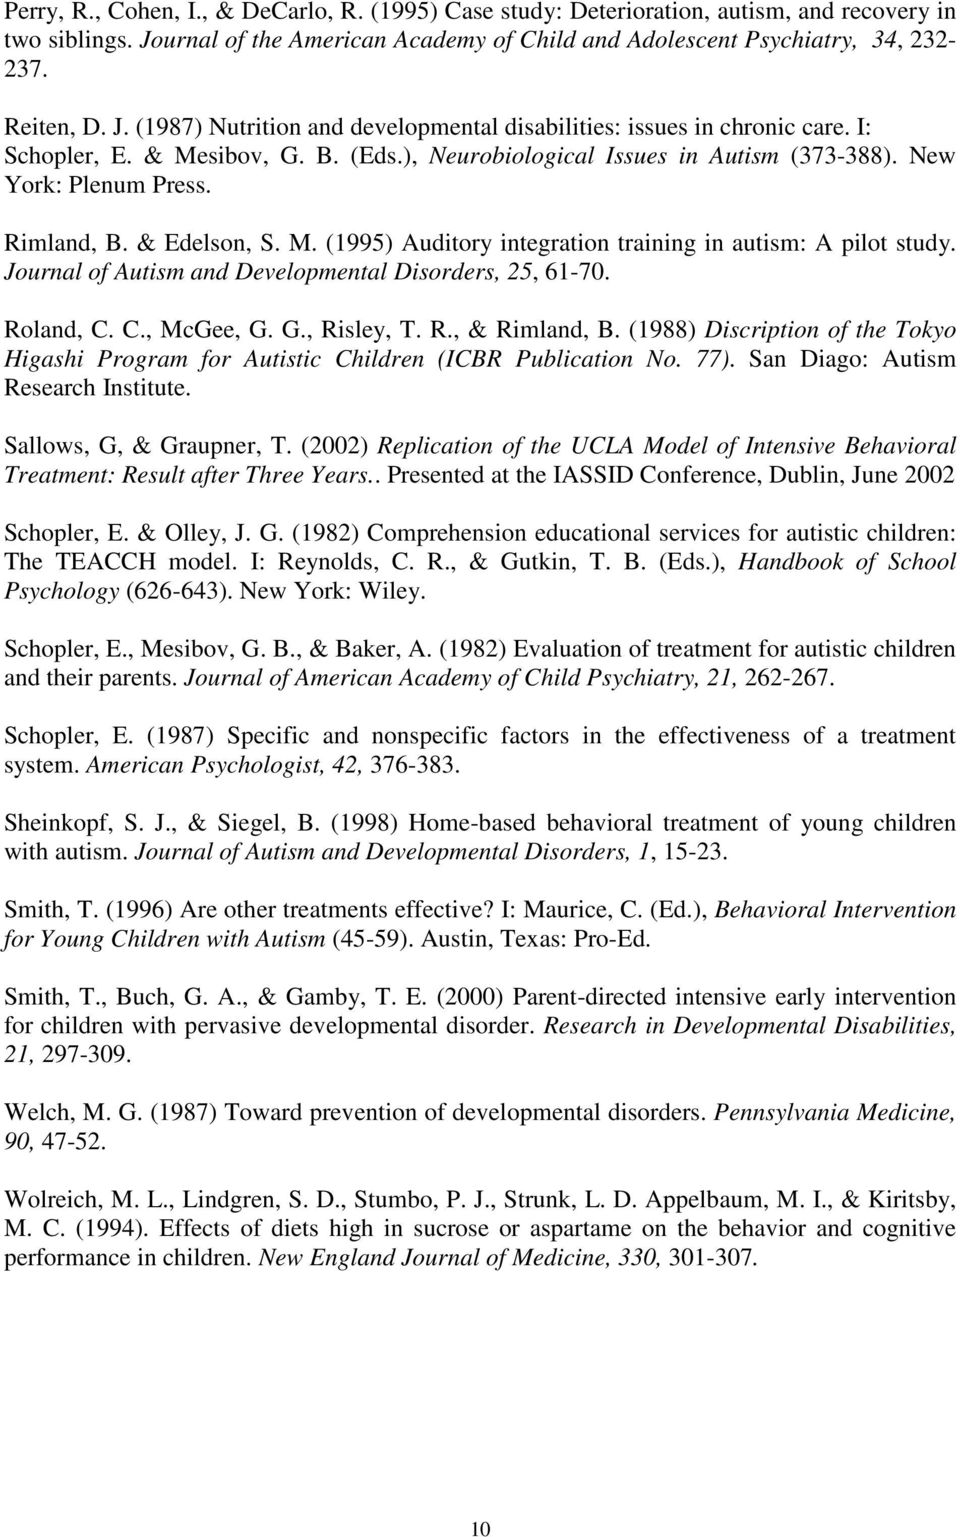 & Edelson, S. M. (1995) Auditory integration training in autism: A pilot study. Journal of Autism and Developmental Disorders, 25, 61-70. Roland, C. C., McGee, G. G., Risley, T. R., & Rimland, B.